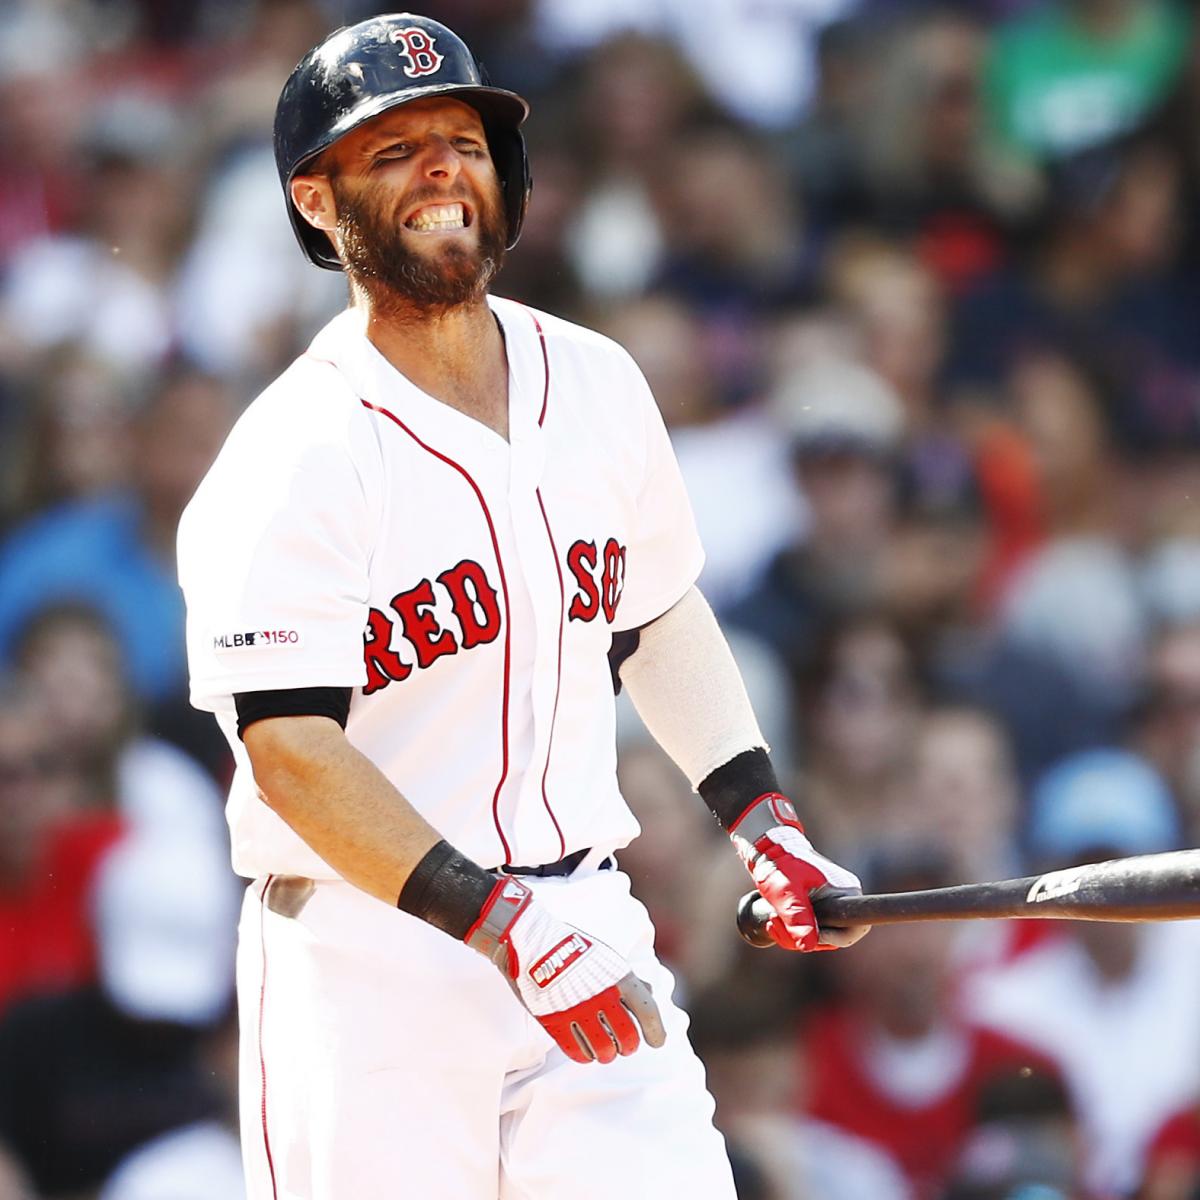 Report: Pedroia Suffers 'Significant Setback' With Knee – NBC Boston